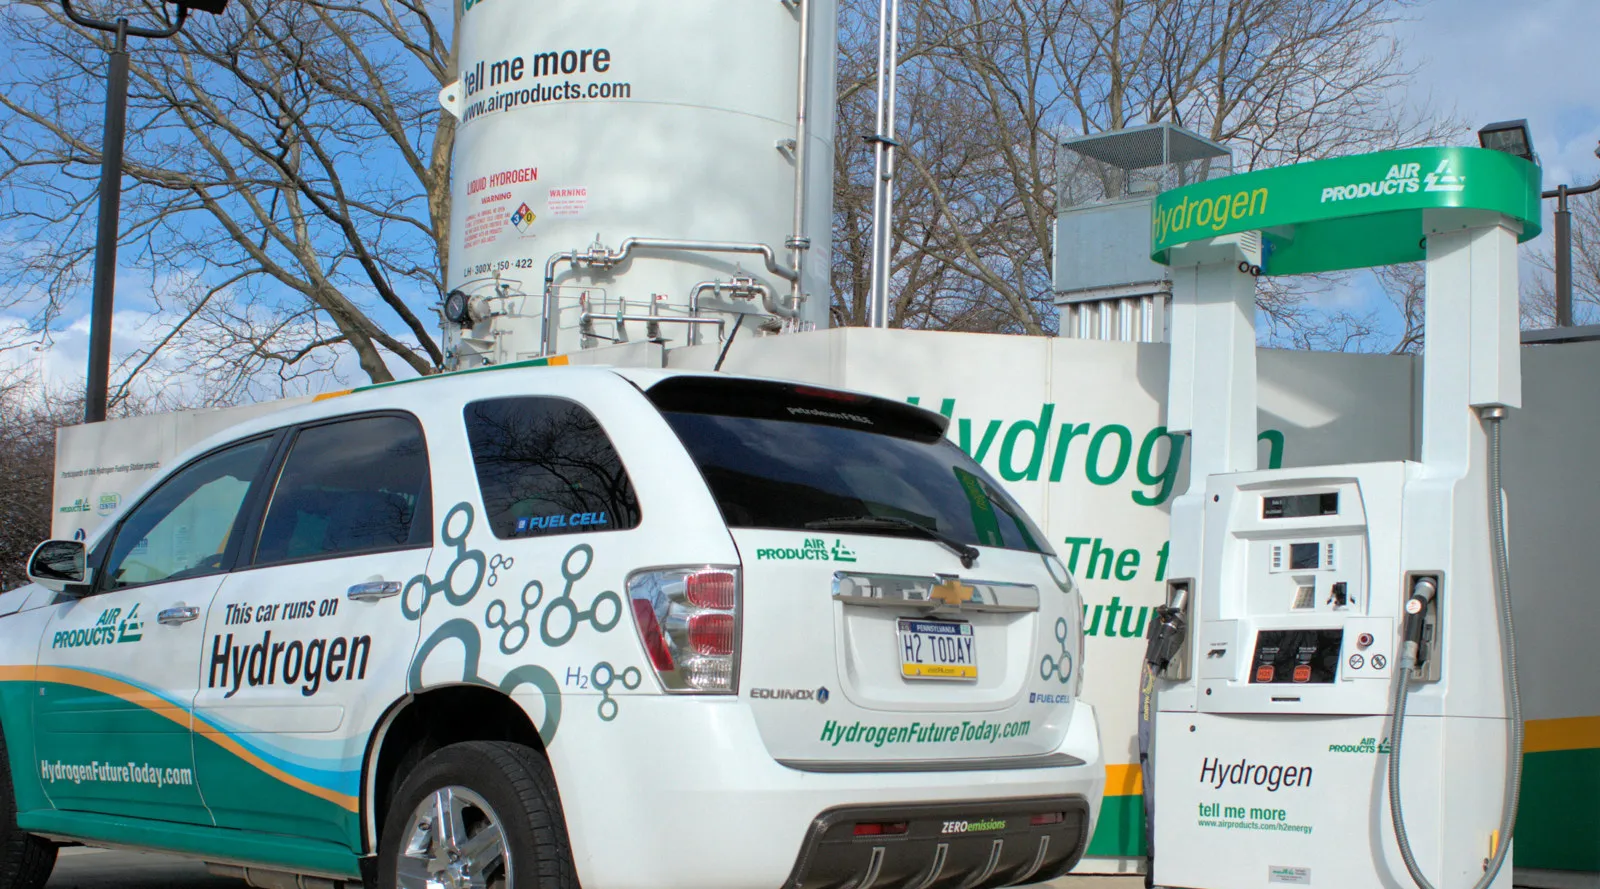 Air Products Announces Plans to Build Network of Commercial-Scale Multi-Modal Hydrogen Refueling Stations Connecting Edmonton and Calgary, Alberta, Canada